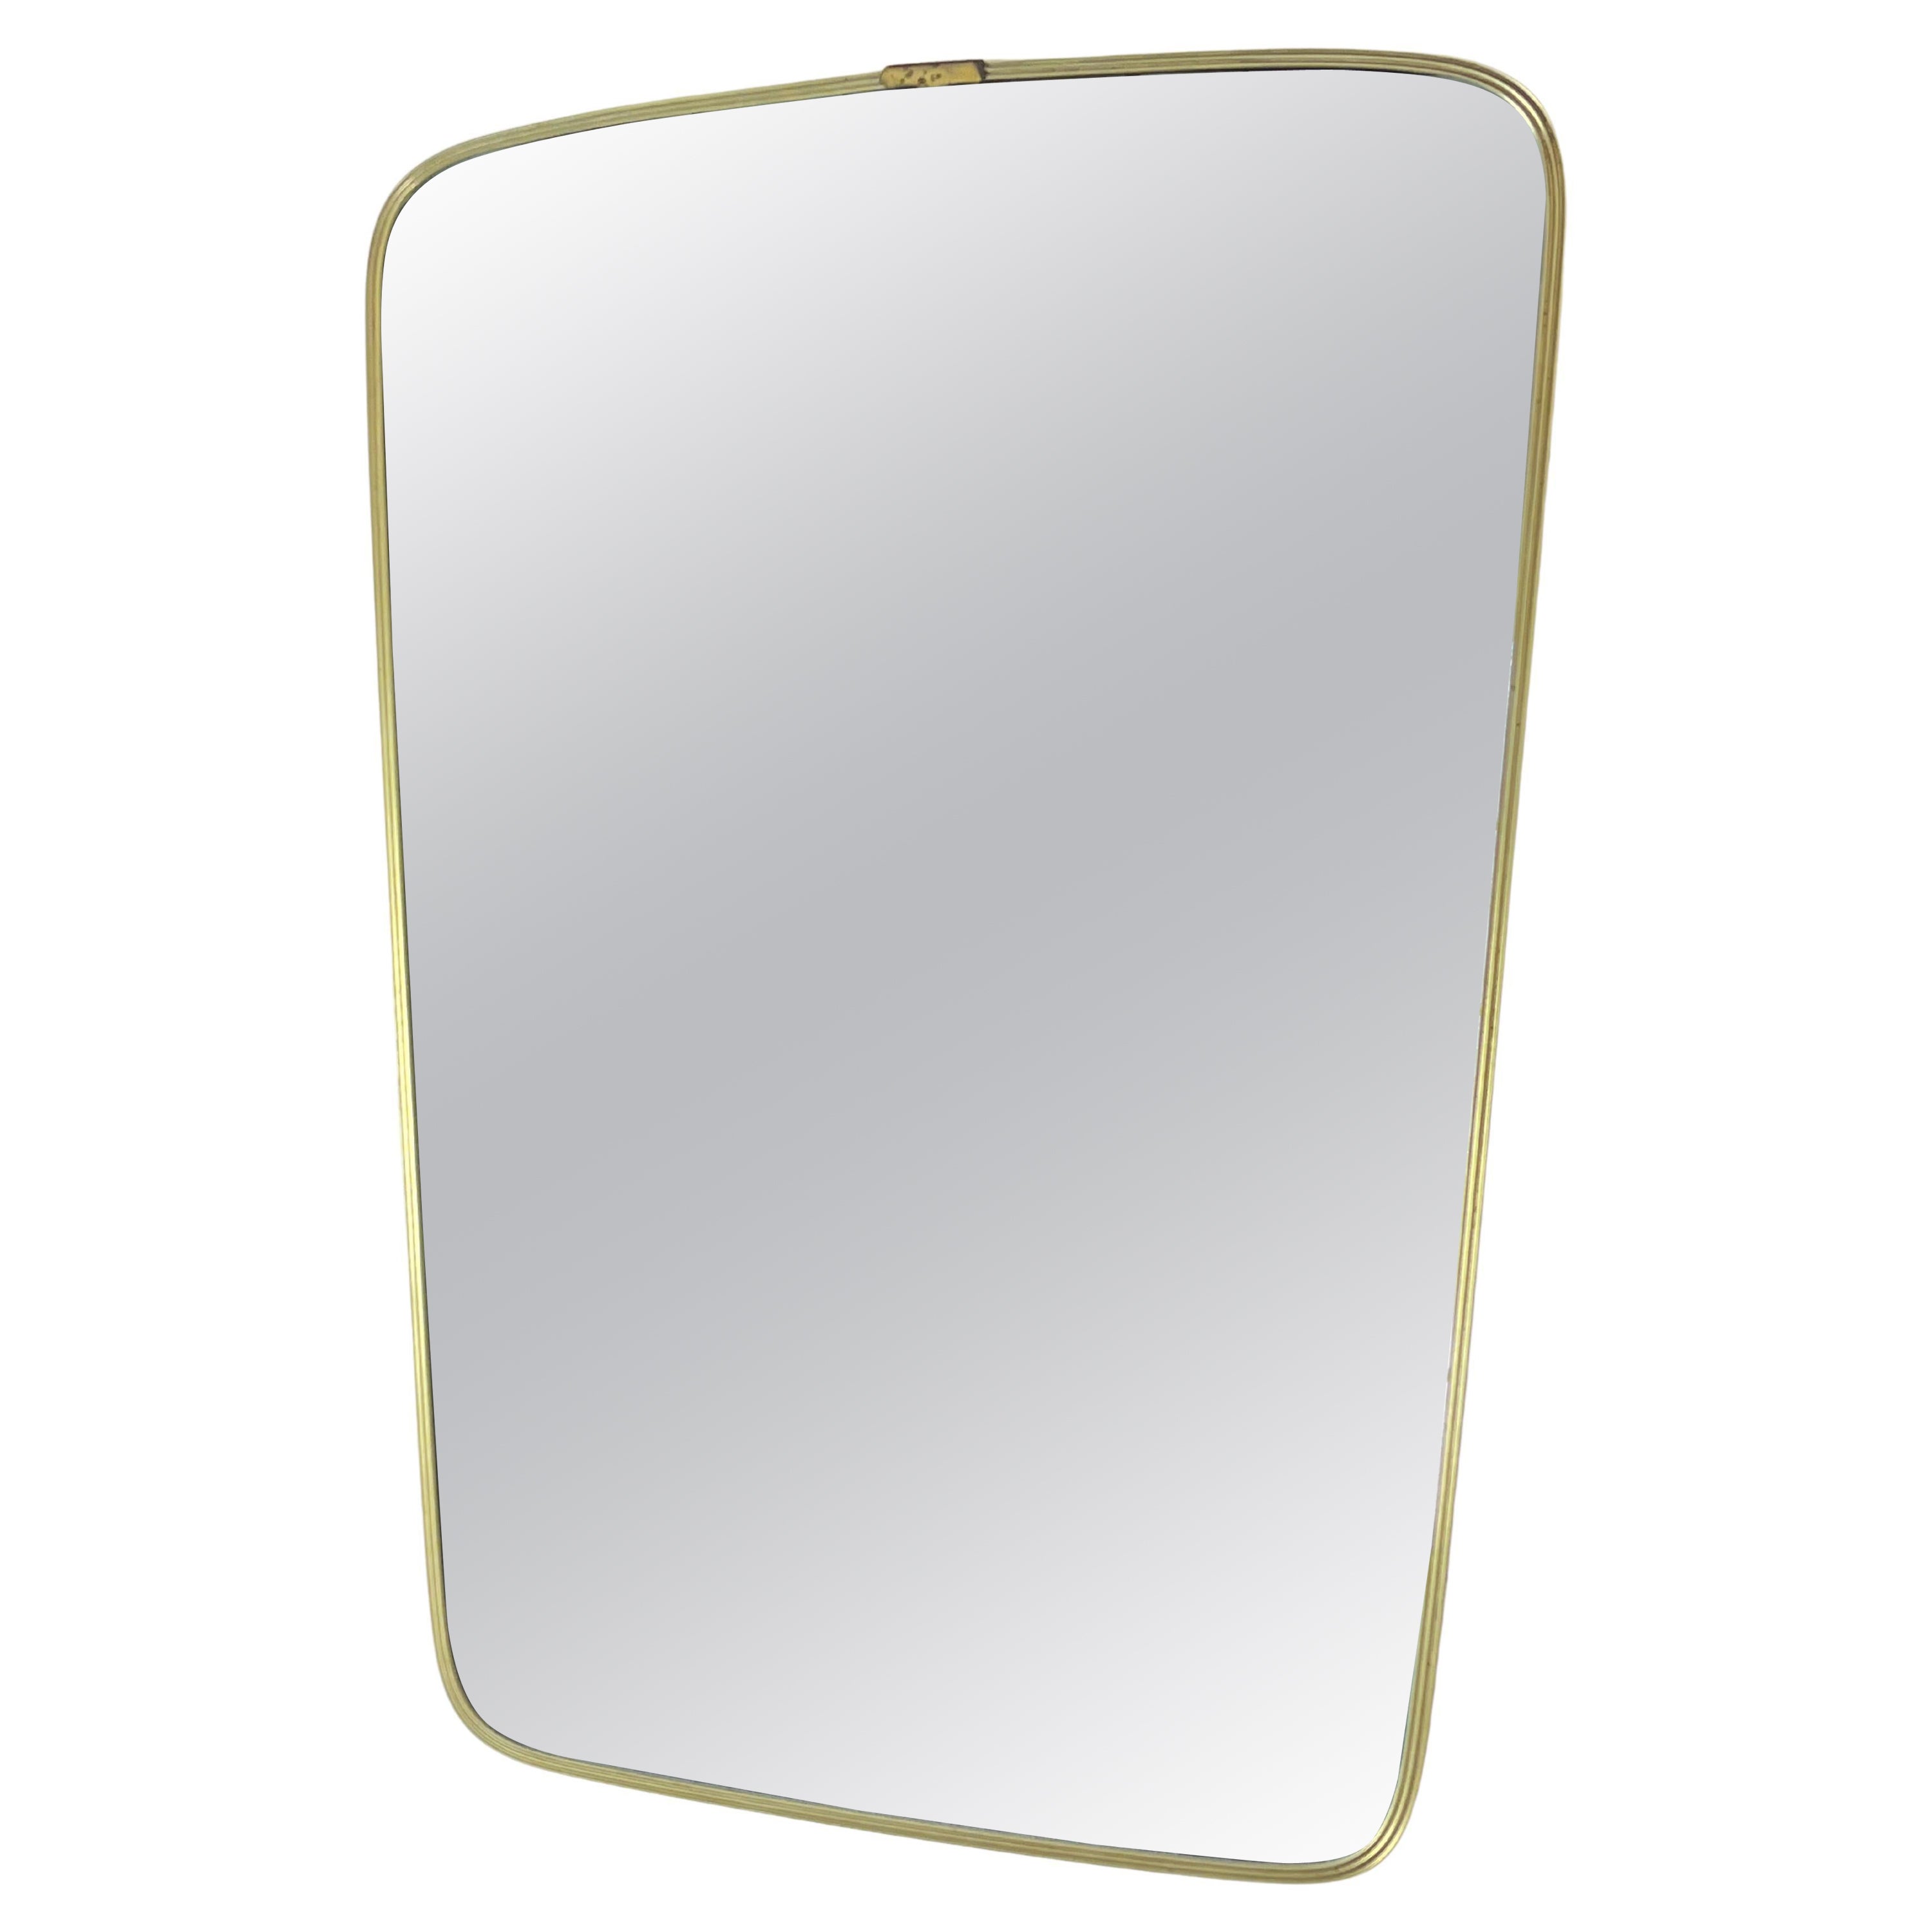 Italian Brass Mirror Attributed To Gio Ponti  1960s For Sale